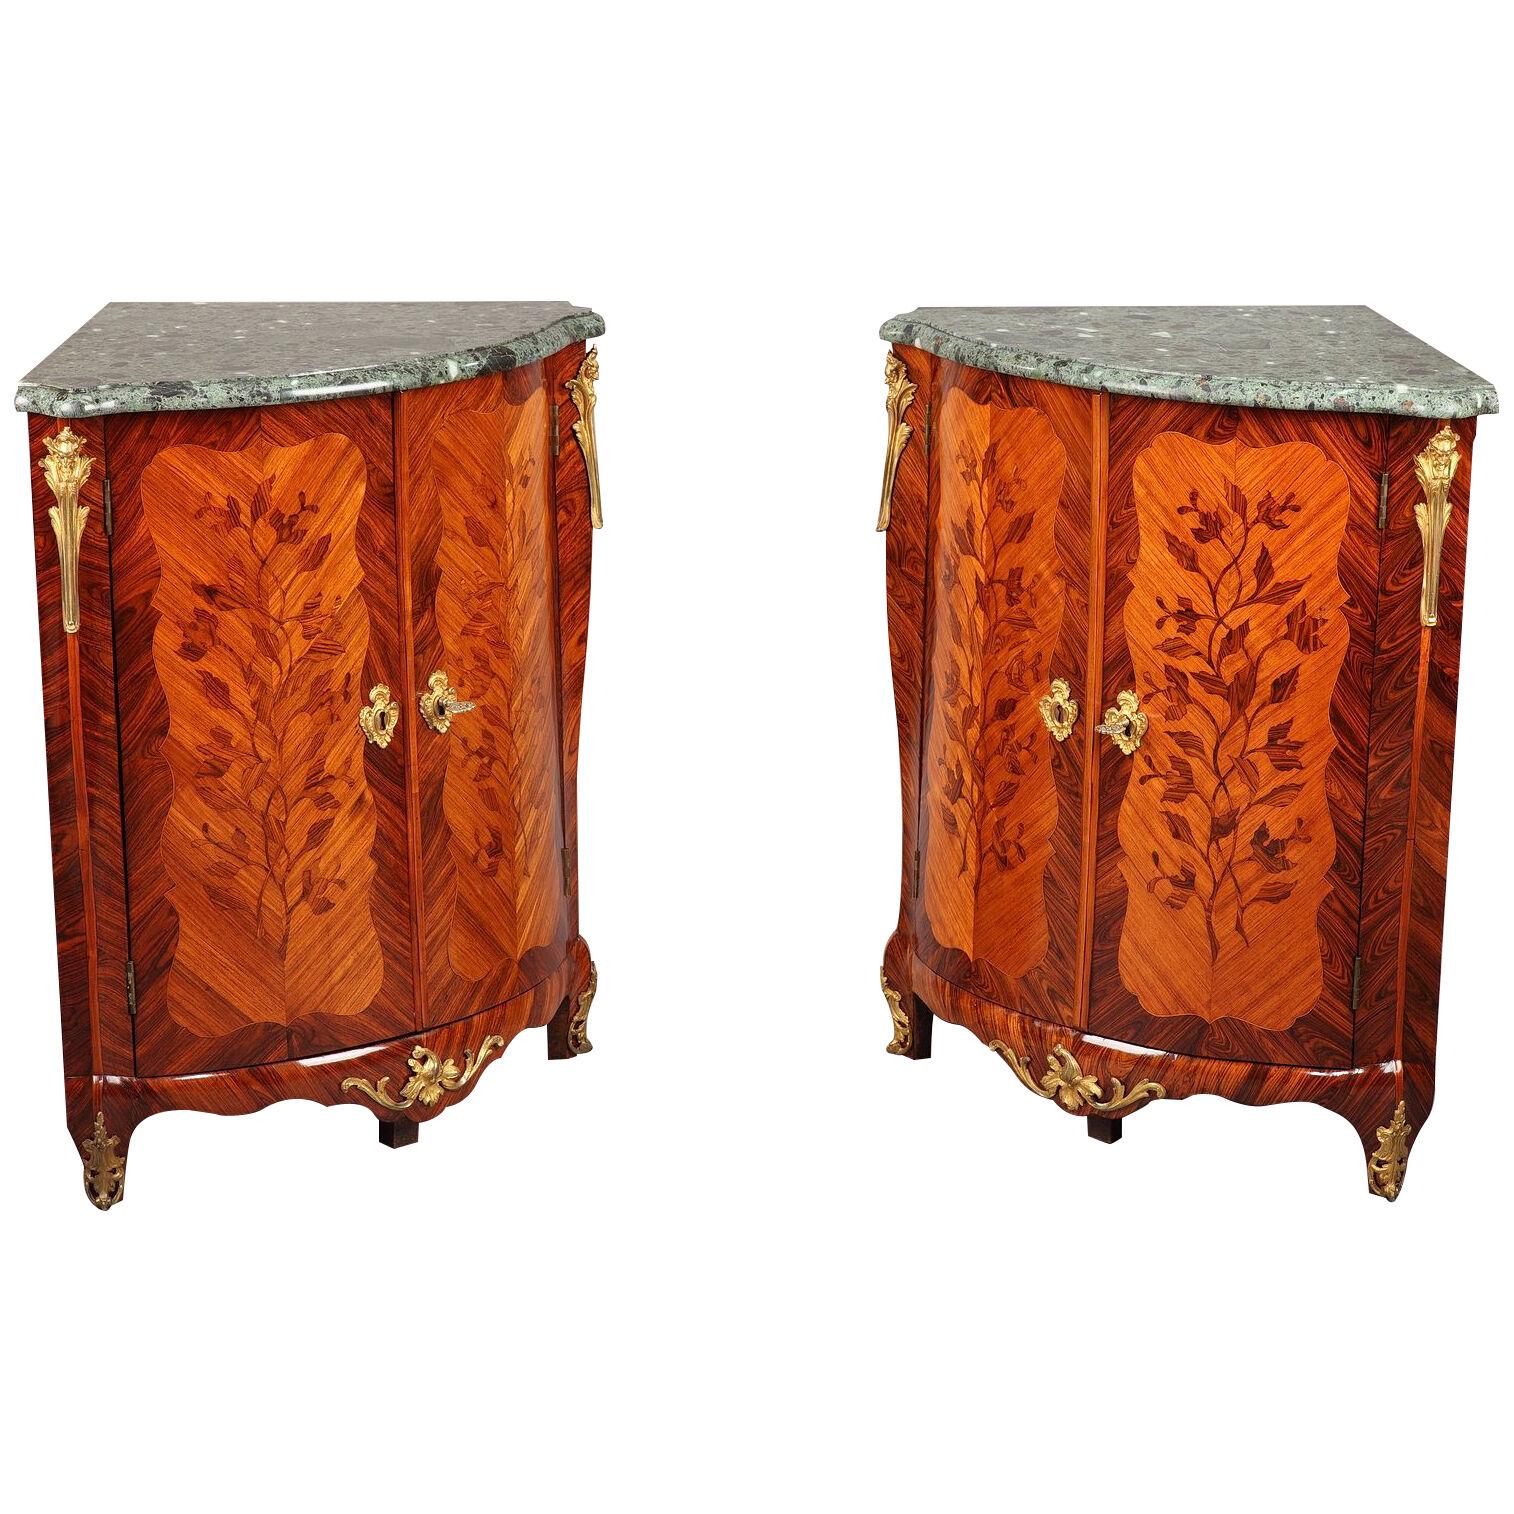 Pair of Corner Cabinets with Flower Marquetry - Louis XV Period